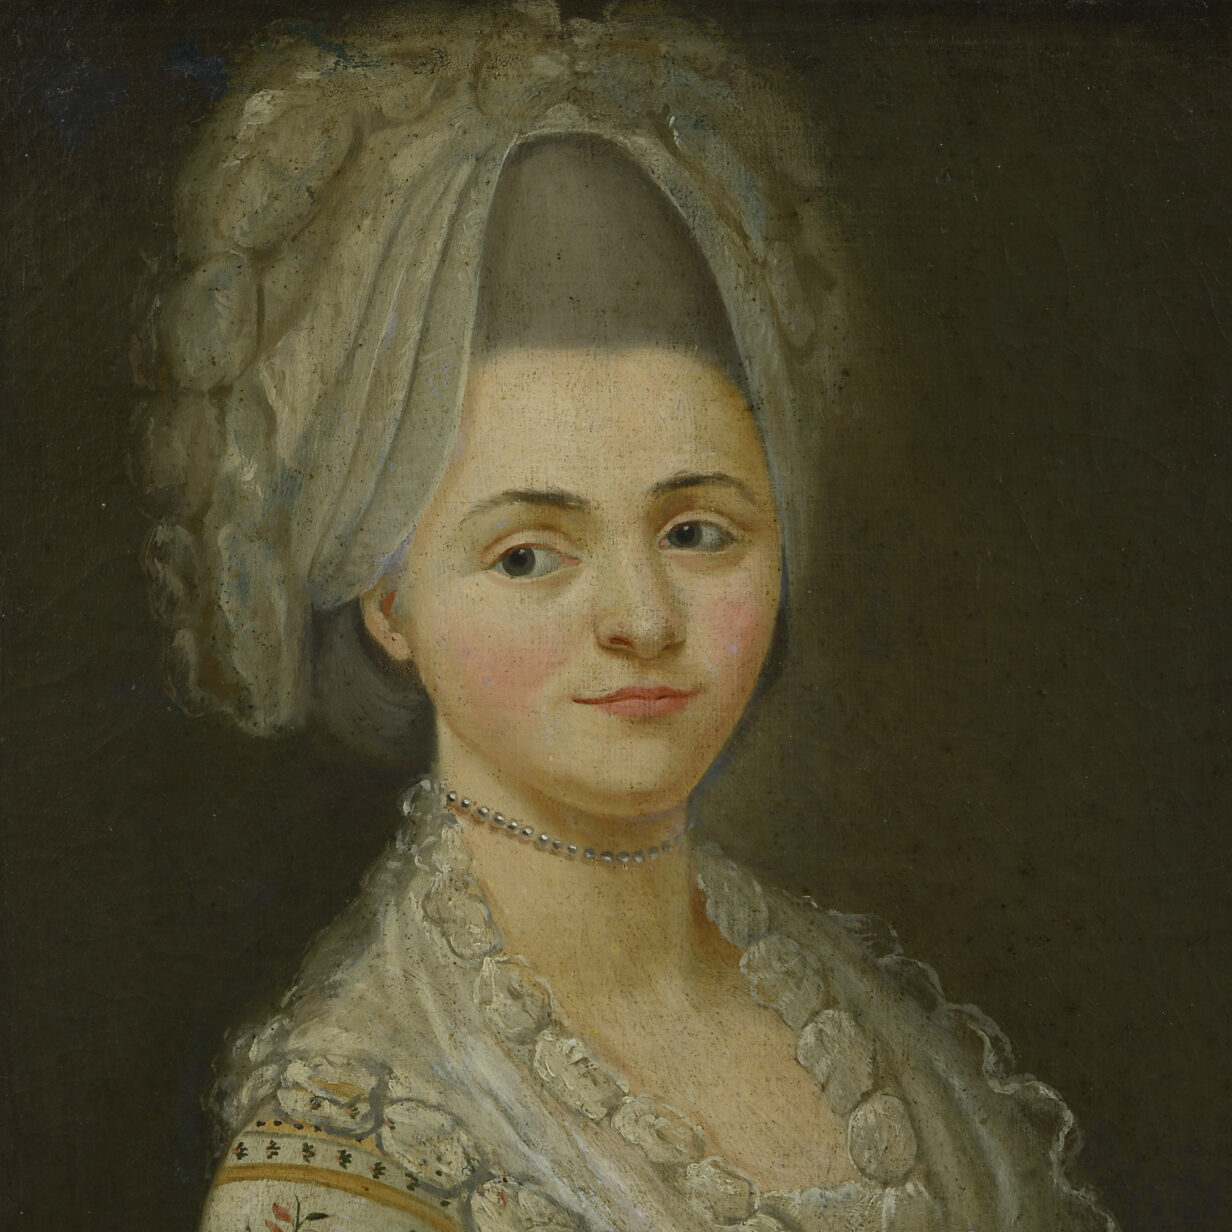 18th century portrait depicting a young lady in a floral dress